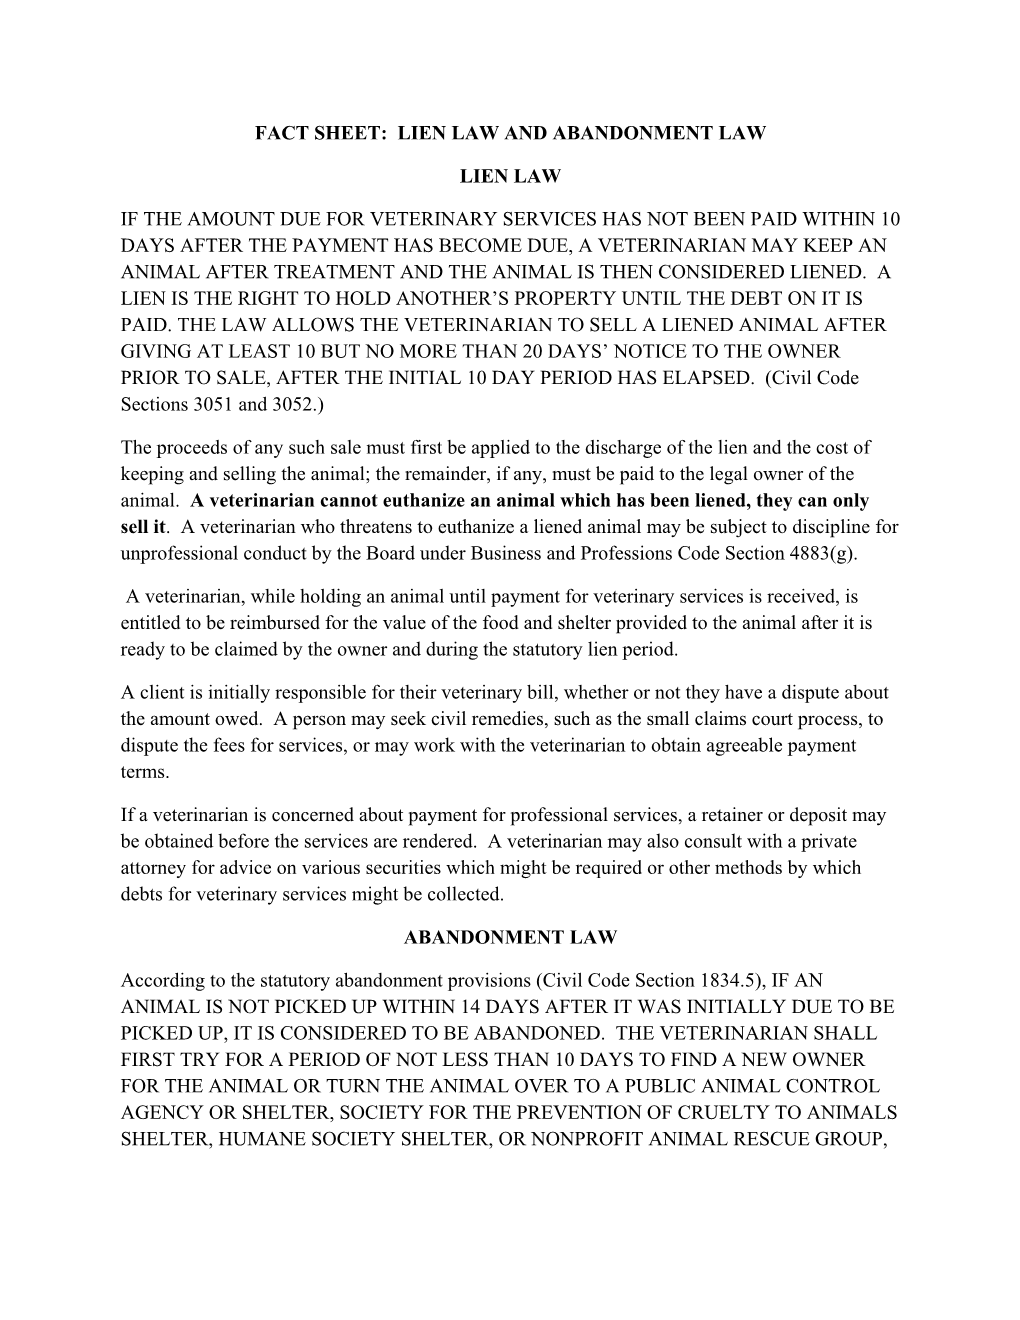 Lien and Abandonment Law Fact Sheet